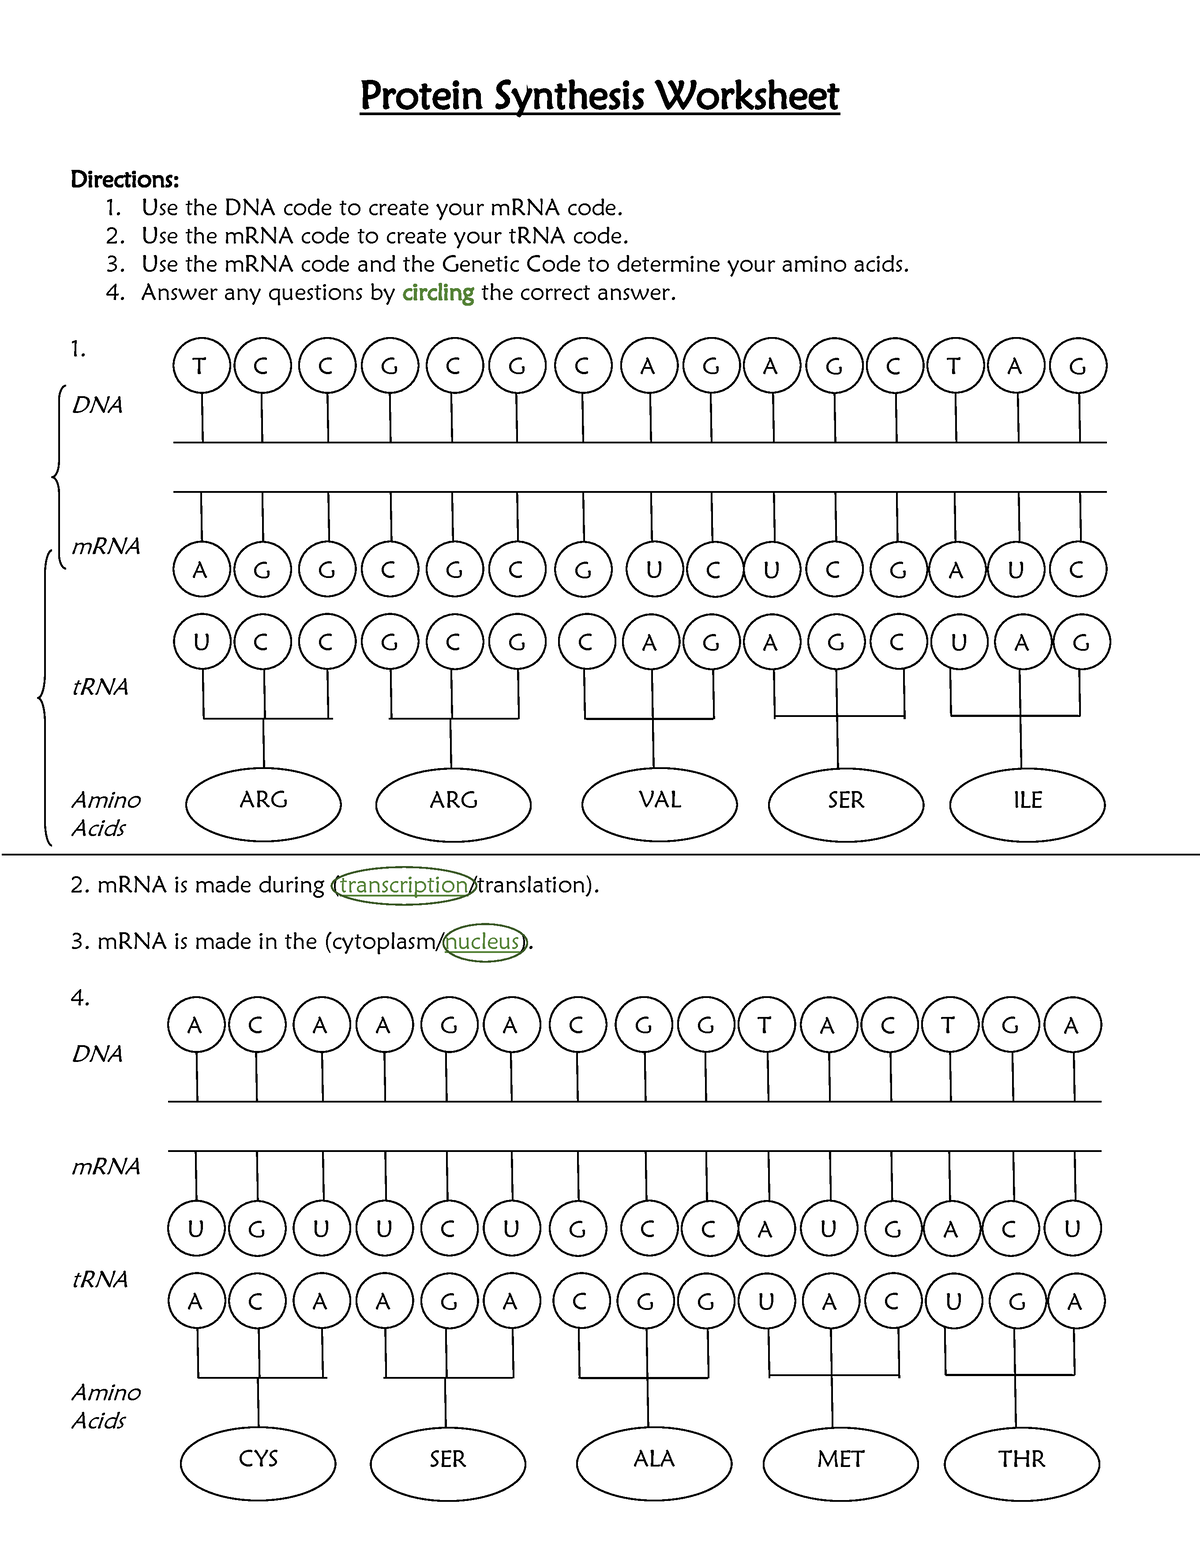 Protein Synthesis Worksheet and Answer Key Protein Synthesis